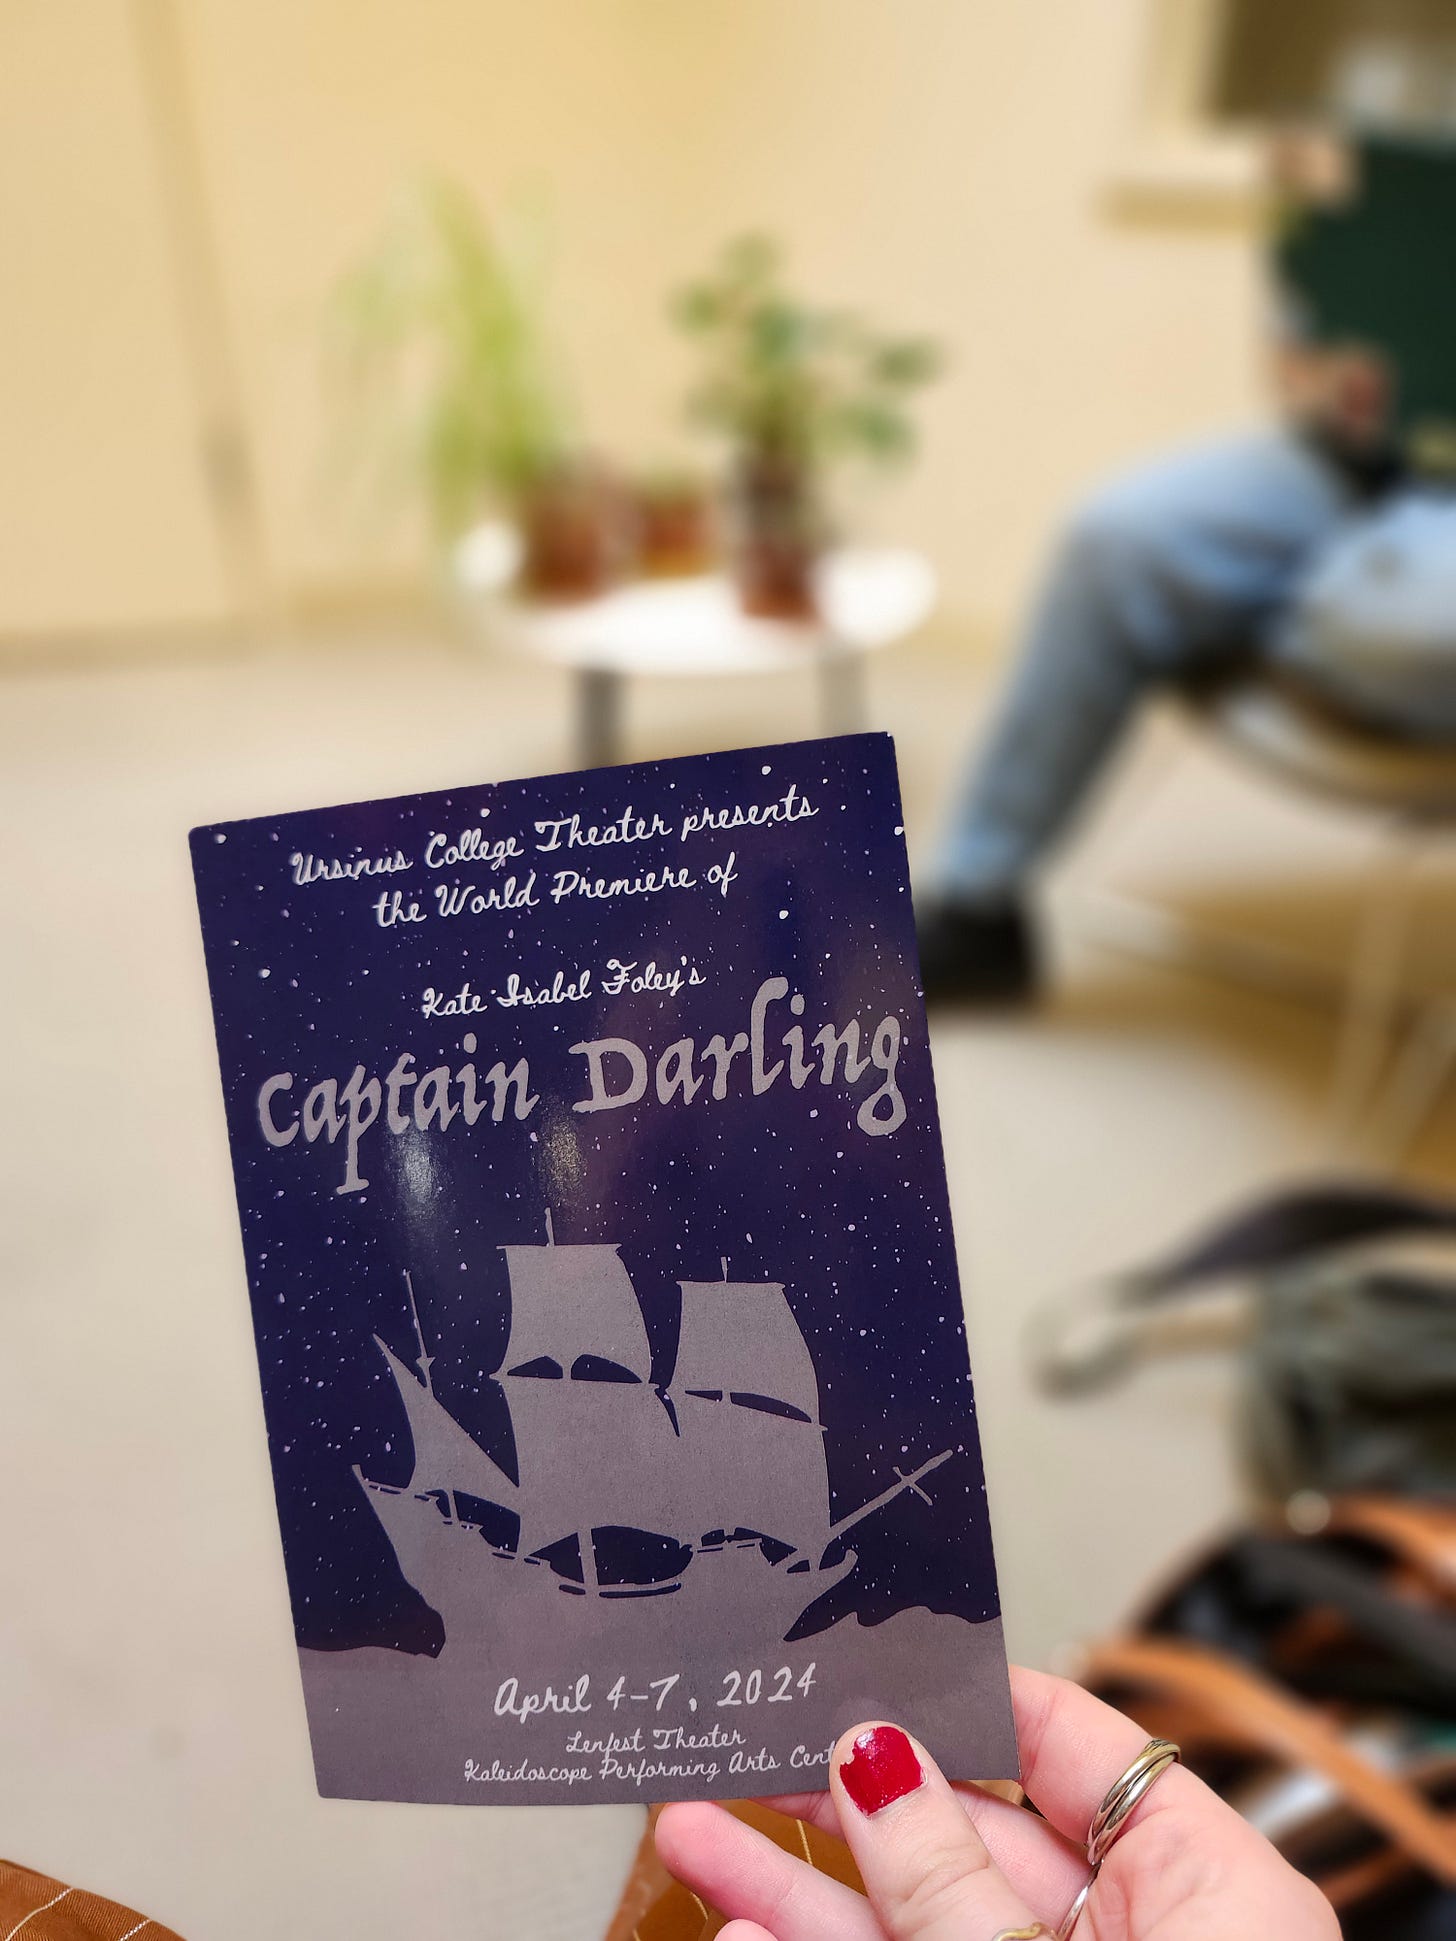 Kate holding a promotional postcard for Captain Darling